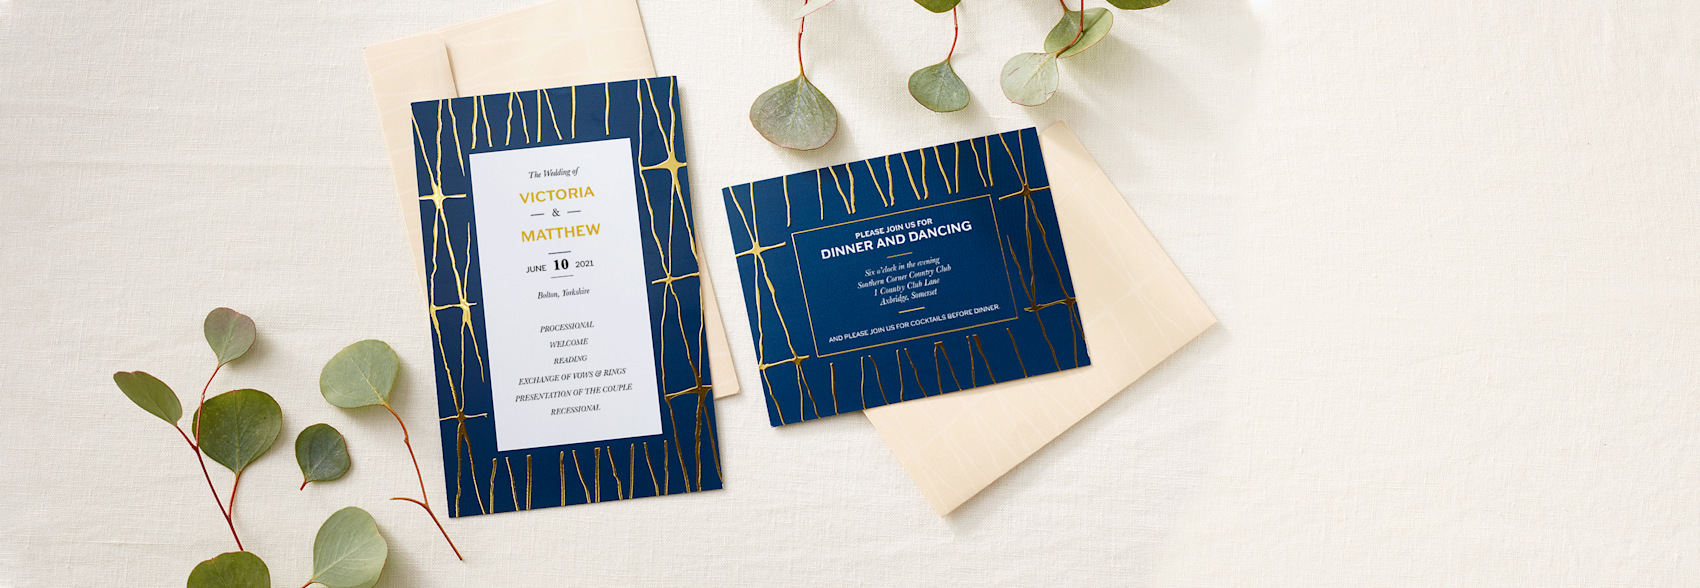 Larger version: Wedding programs with gold foil finish